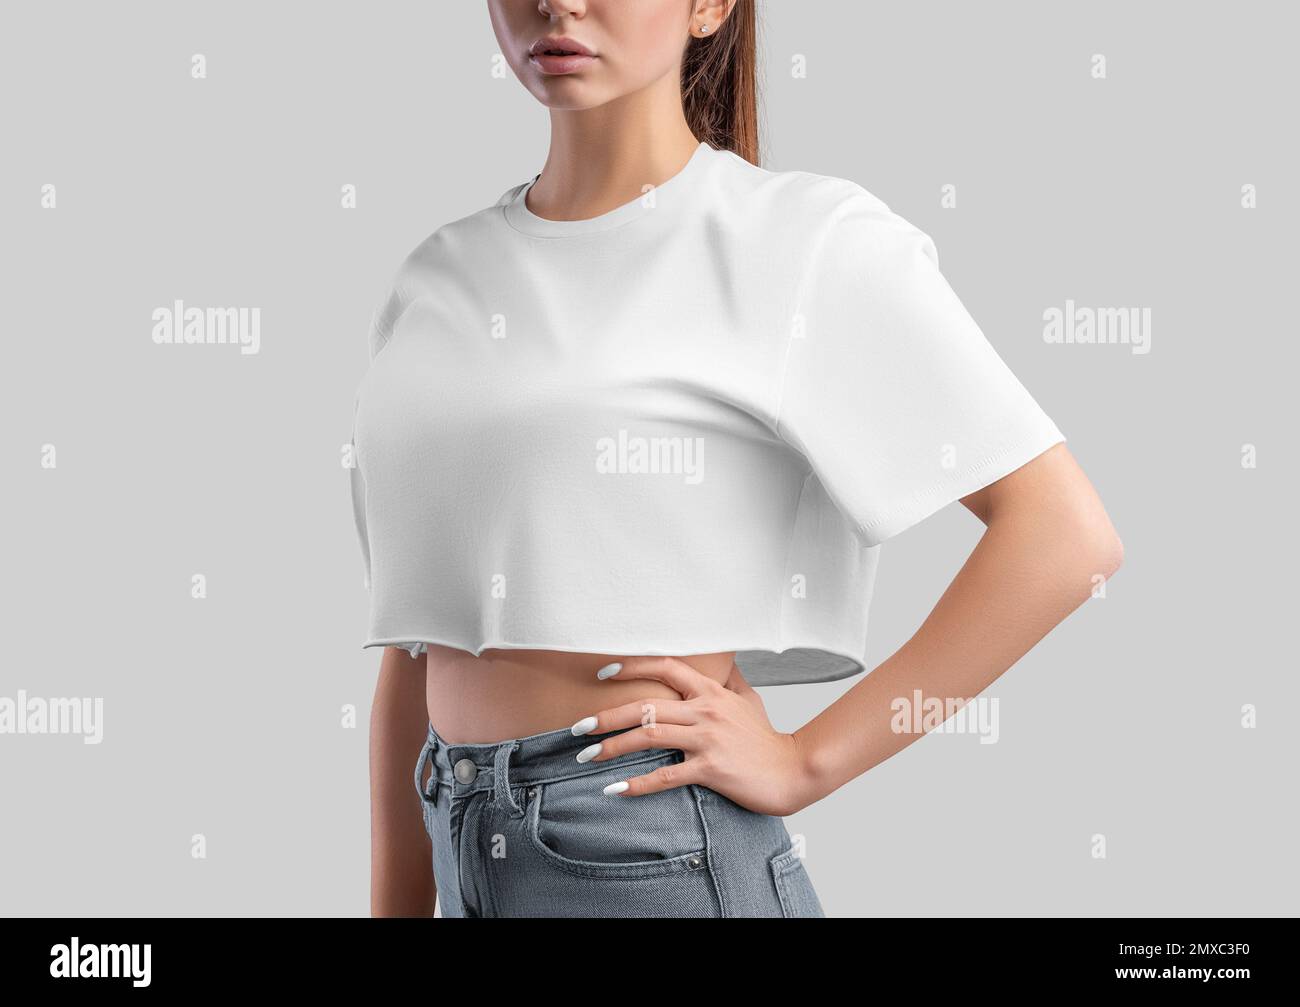 White t-shirt template, crop top on a girl in jeans, isolated on  background, side view. Free cut t-shirt mockup, empty clothes oversized.  Fashion shir Stock Photo - Alamy